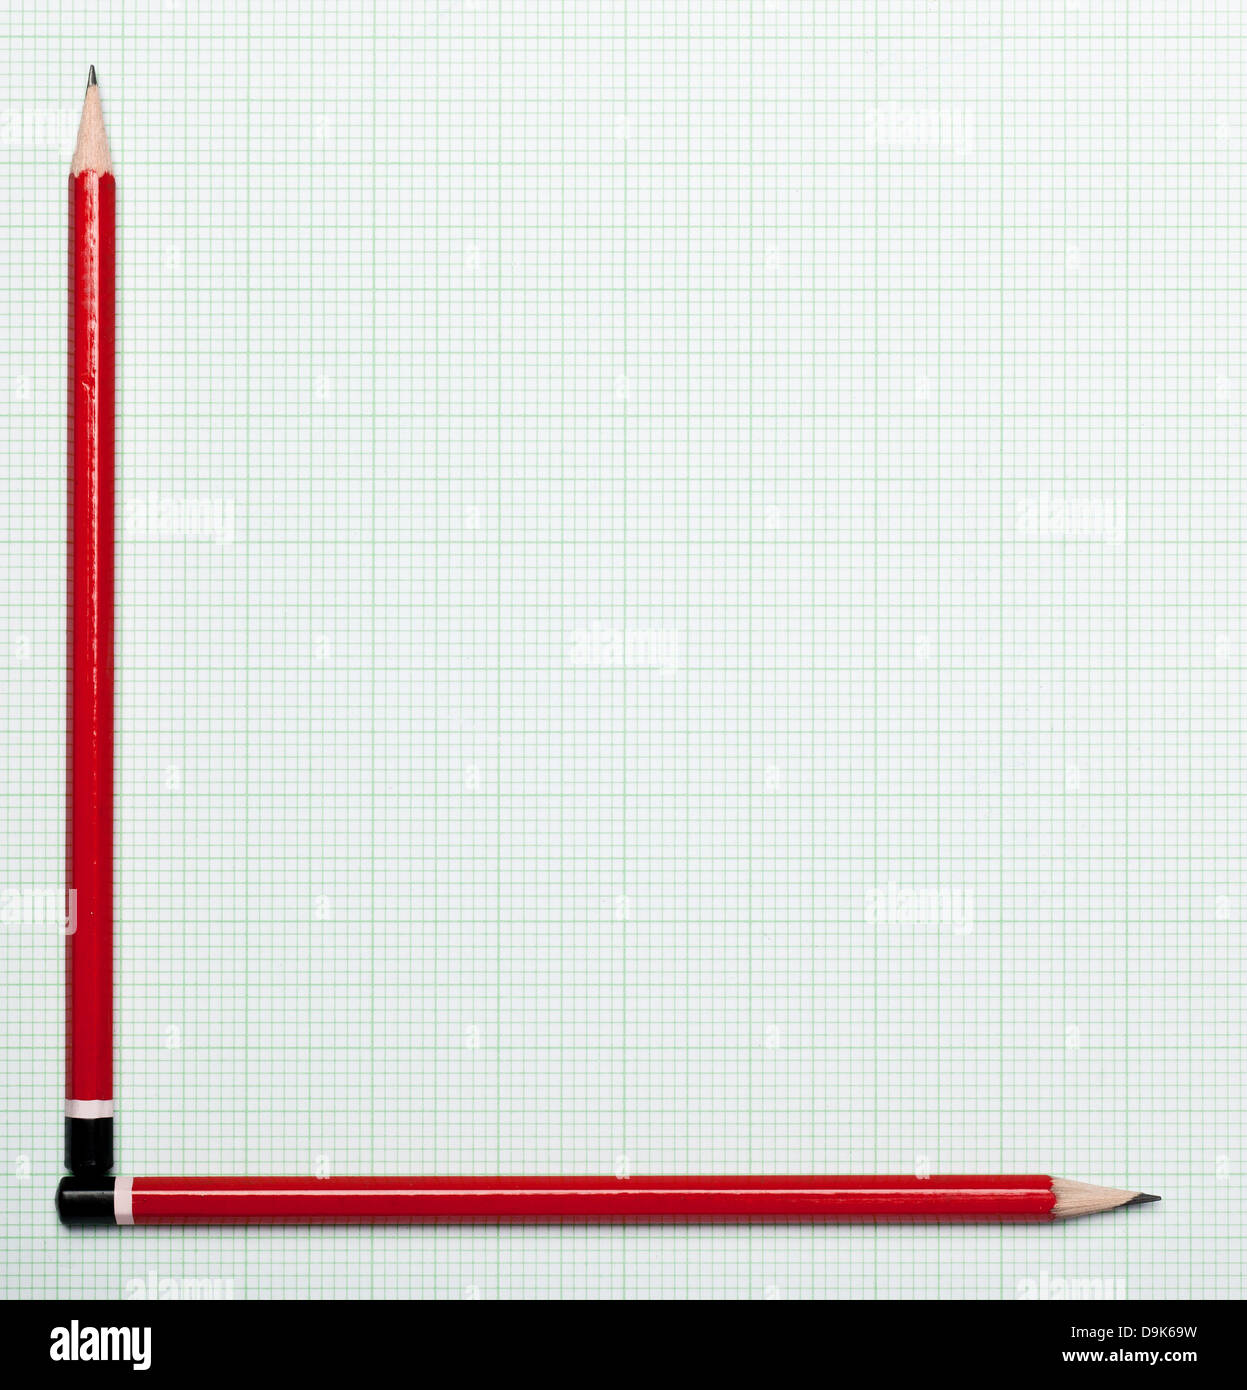 Blank graph paper with pencils as axis Stock Photo